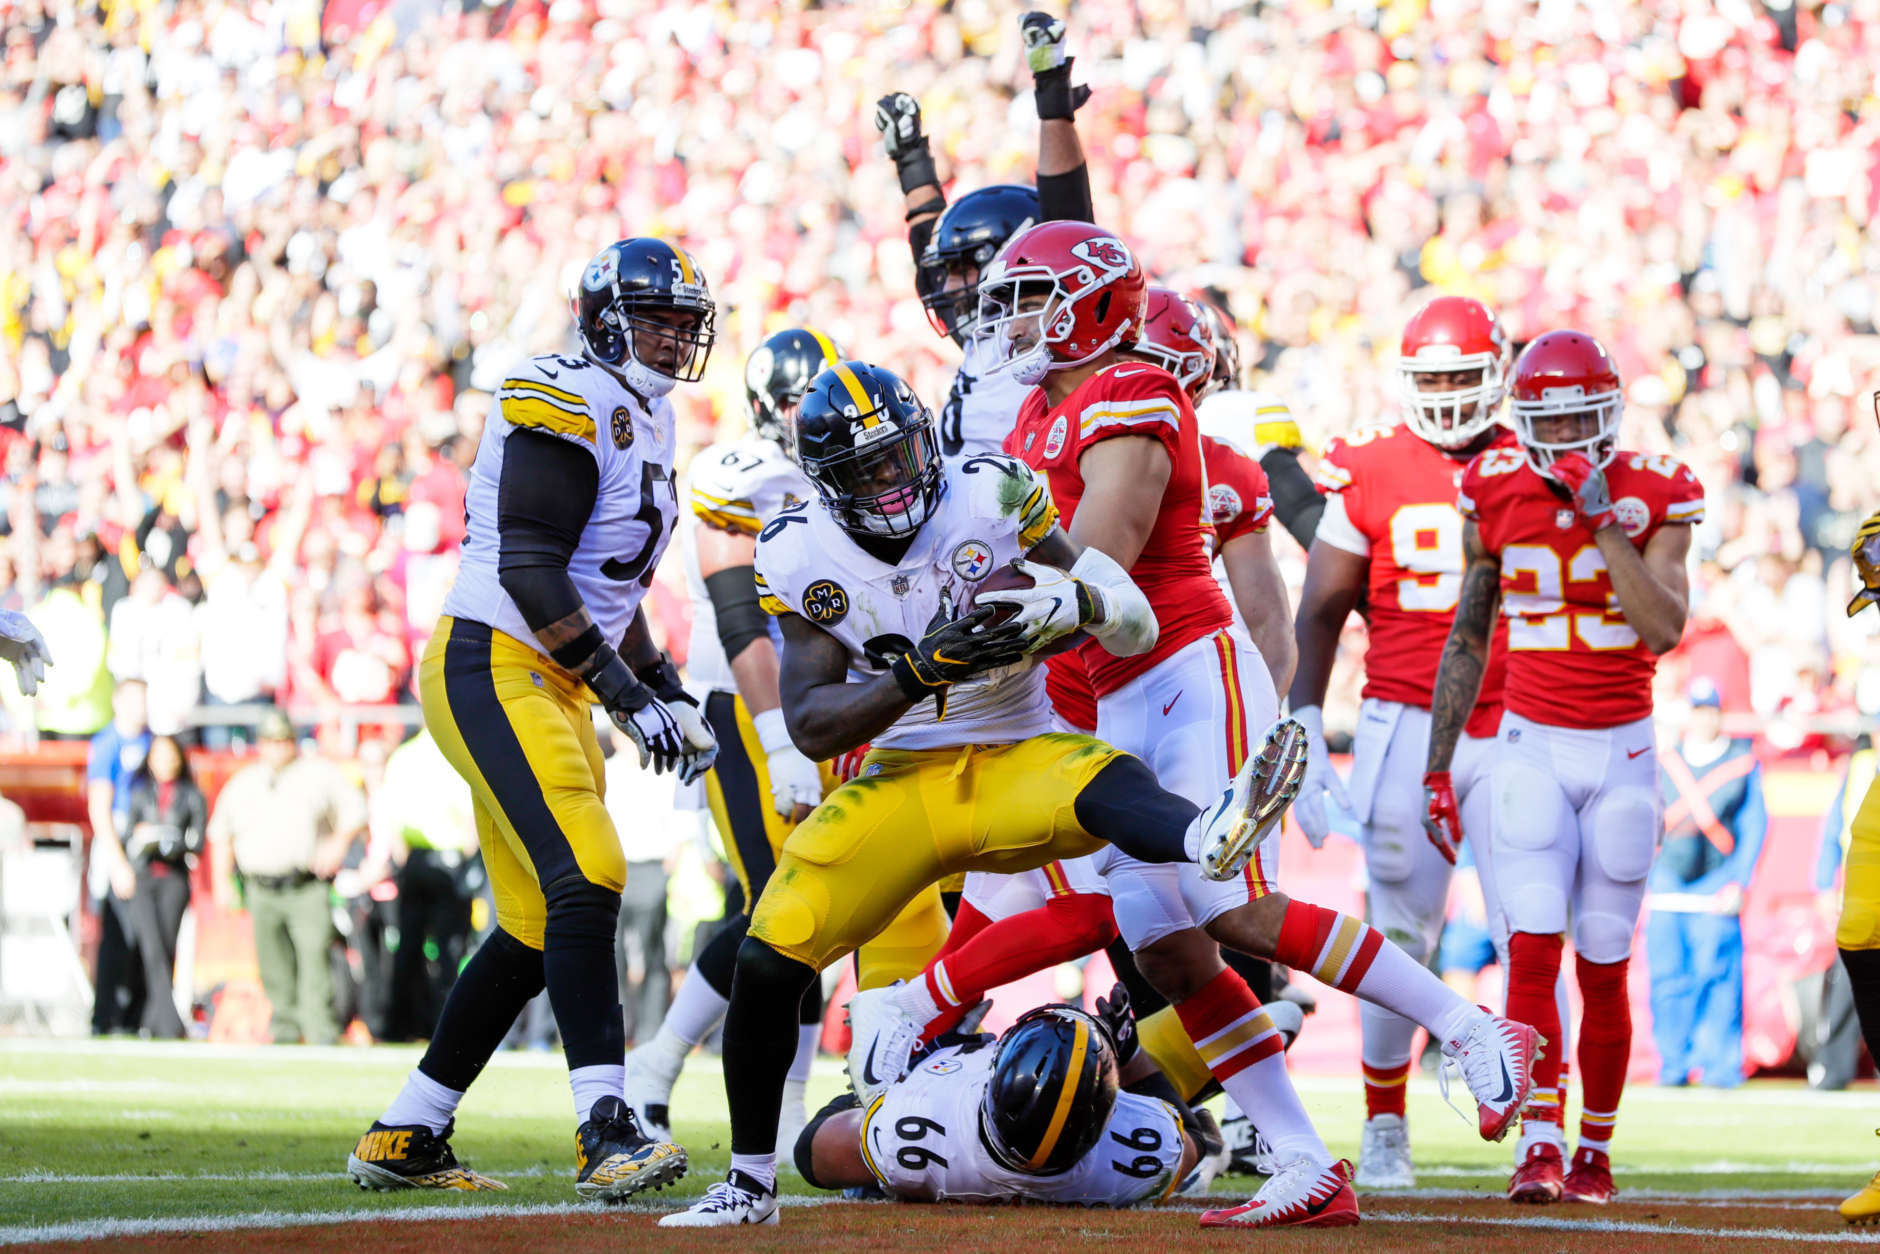 KANSAS CITY, MO - OCTOBER 15: Running back Le'Veon Bell #26 of the Pittsburgh Steelers fights his way through the tackle attempt of outside linebacker Frank Zombo #51 of the Kansas City Chiefs in to the end zone for a touchdown at Arrowhead Stadium on October 15, 2017 in Kansas City, Missouri. ( Photo by Jamie Squire/Getty Images )